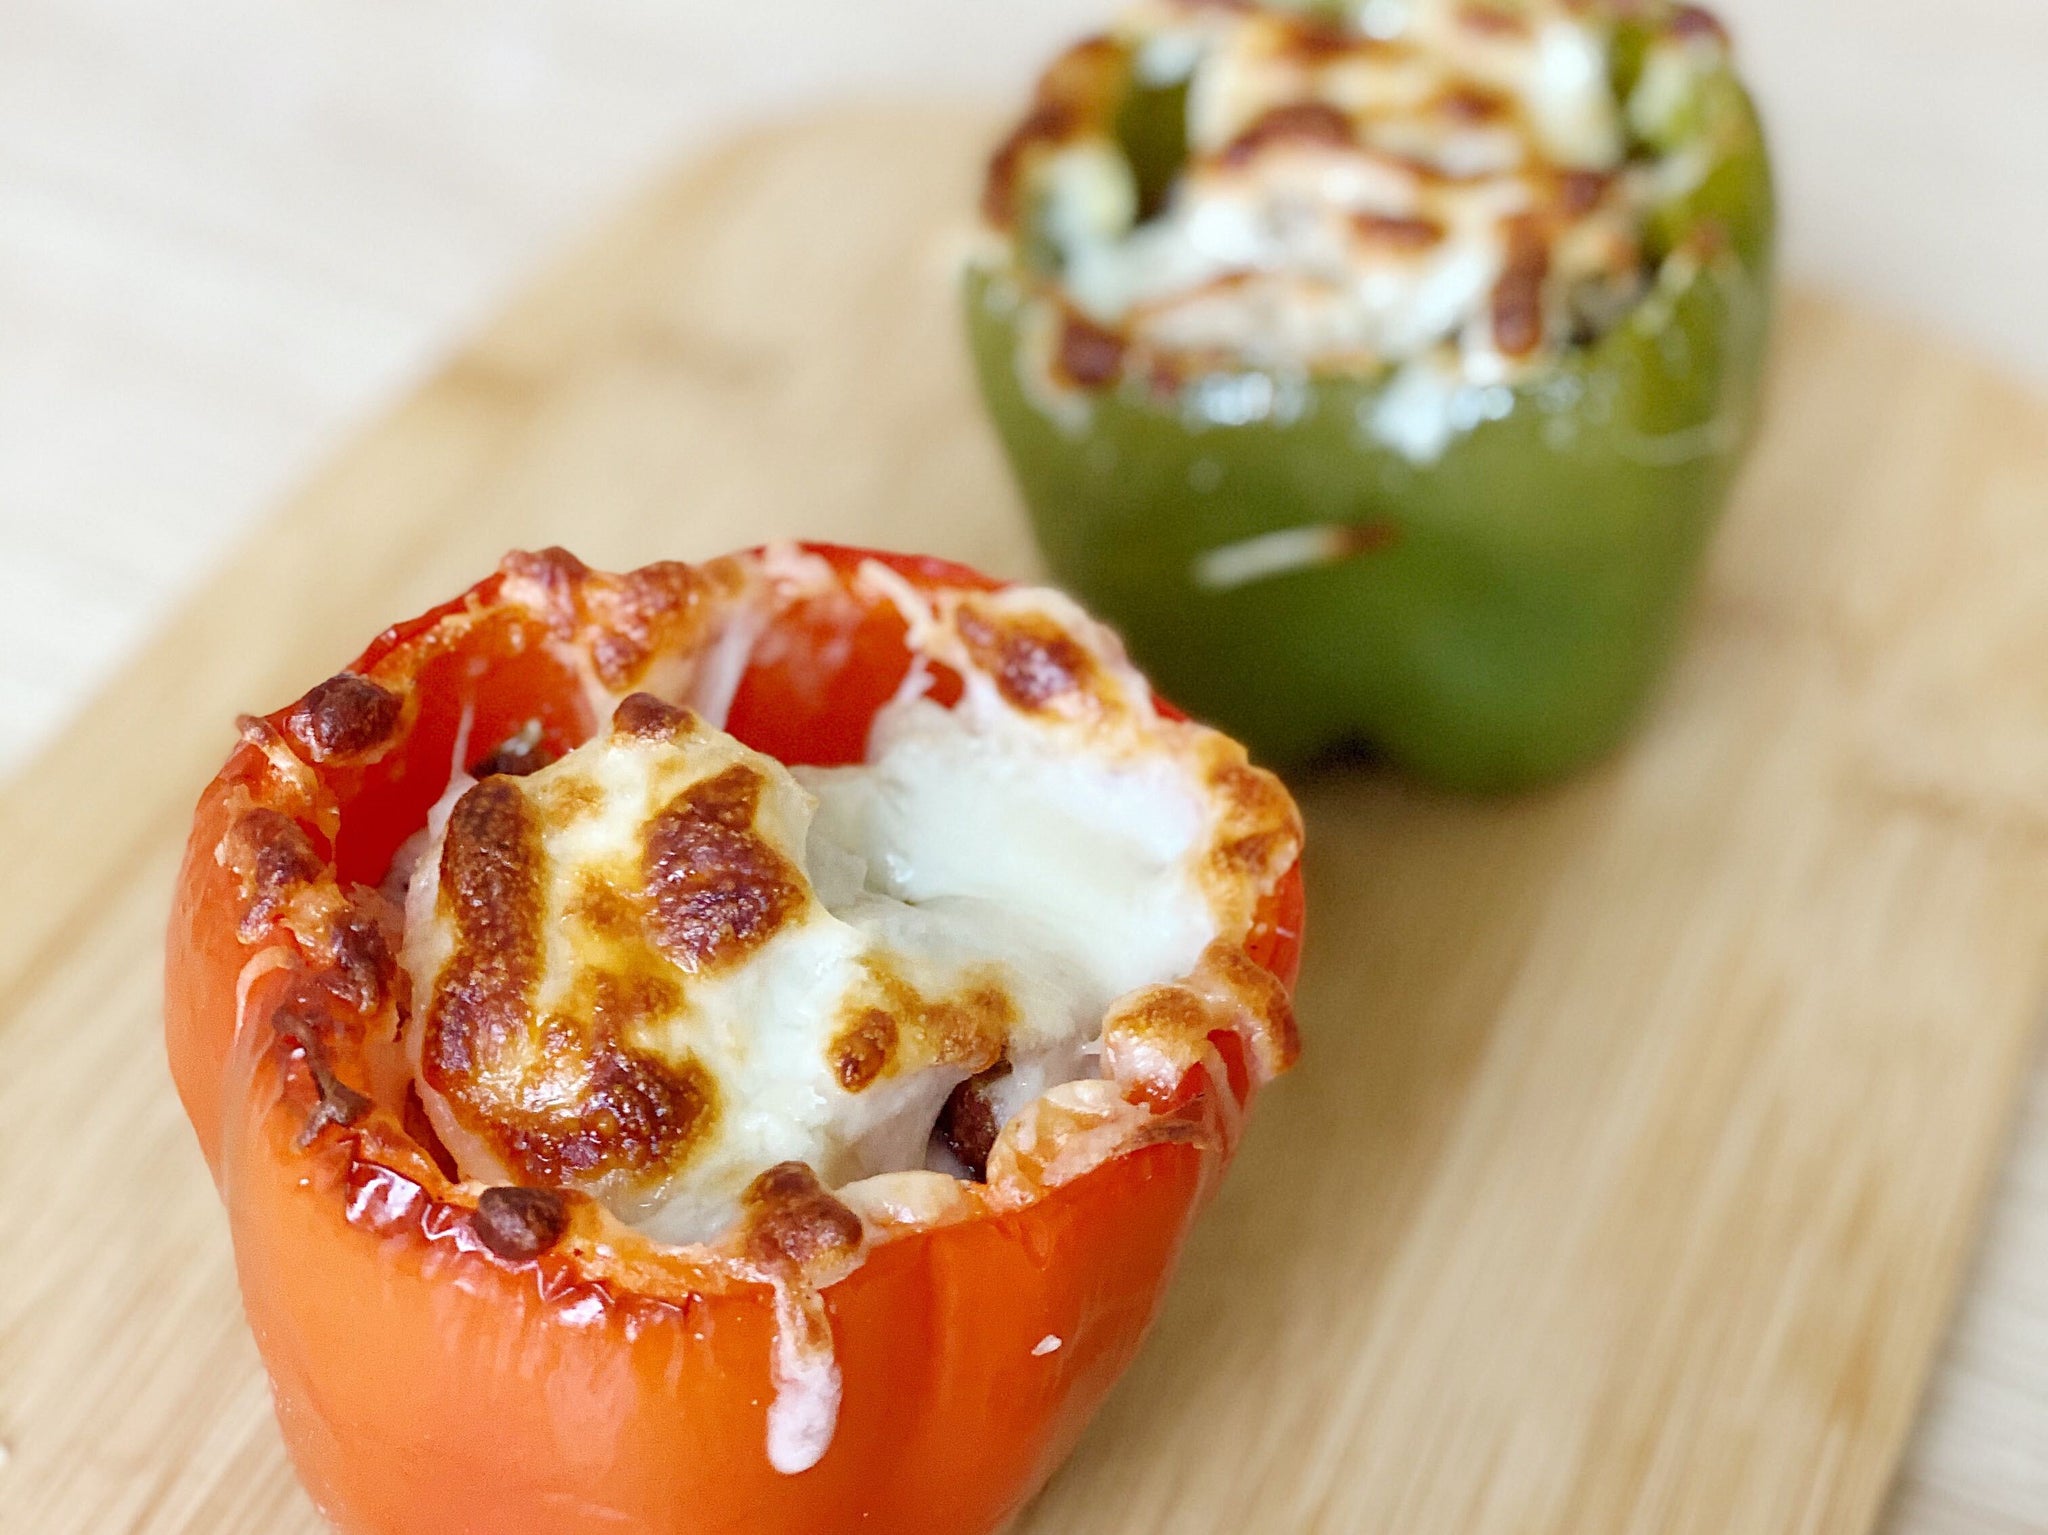 Rootastes “Cauliflower-Rice” Stuffed Bell Peppers